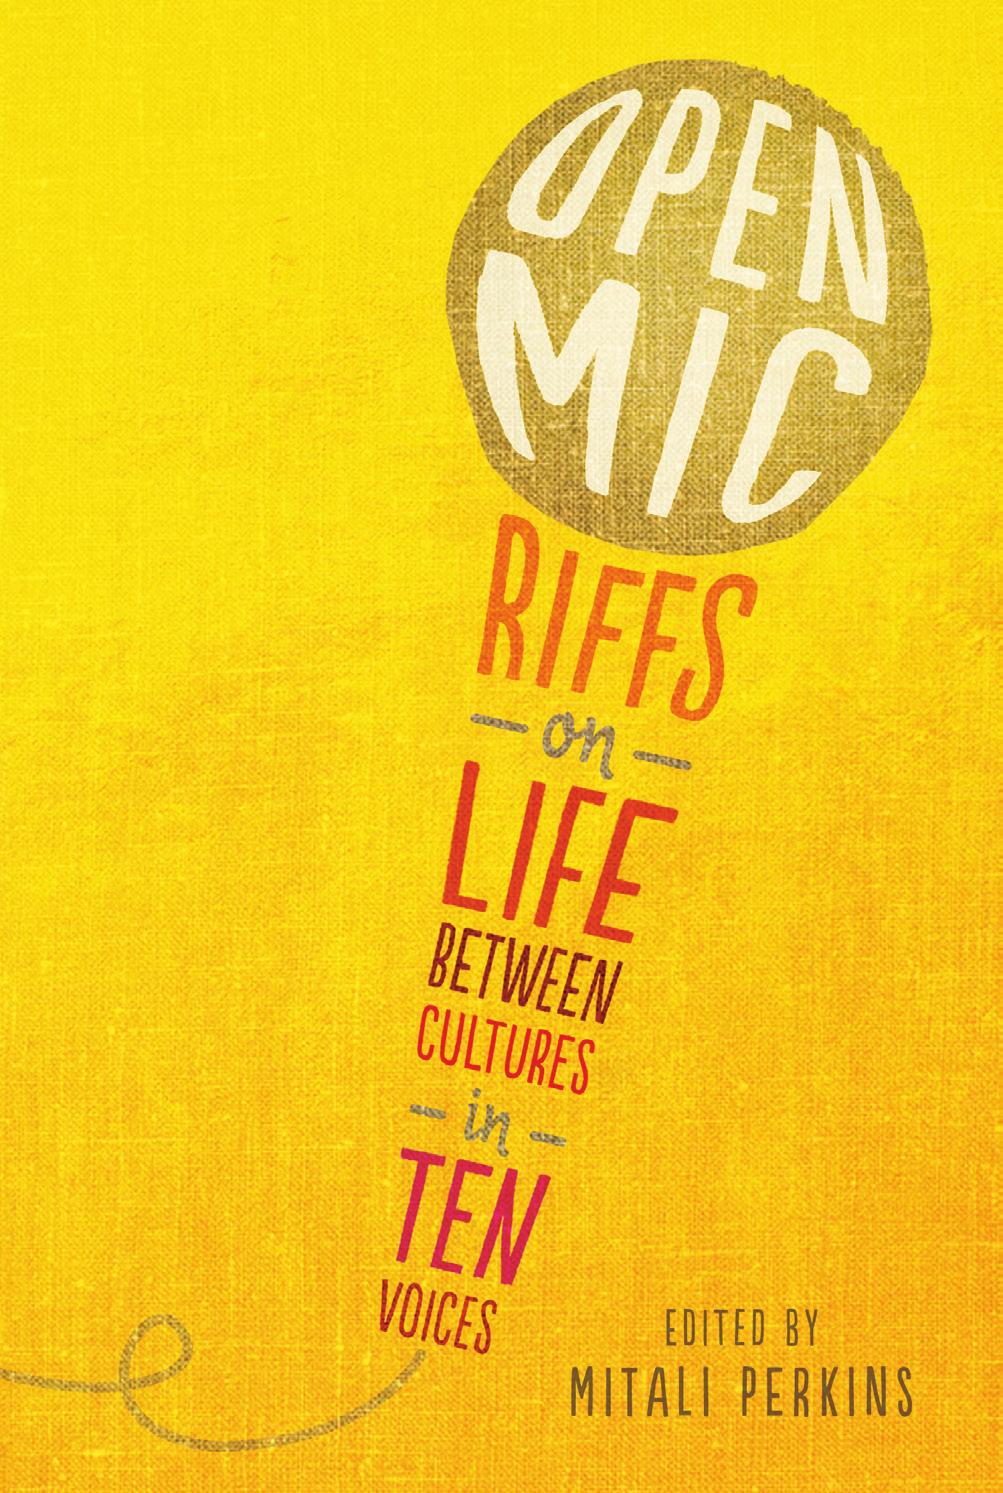 CANDLEWICK PRESS TEACHERS GUIDE OPEN MIC riffs on life between cultures in ten voices edited by MITALI PERKINS introduction Listen in as ten YA authors some familiar, some new use their own brand of